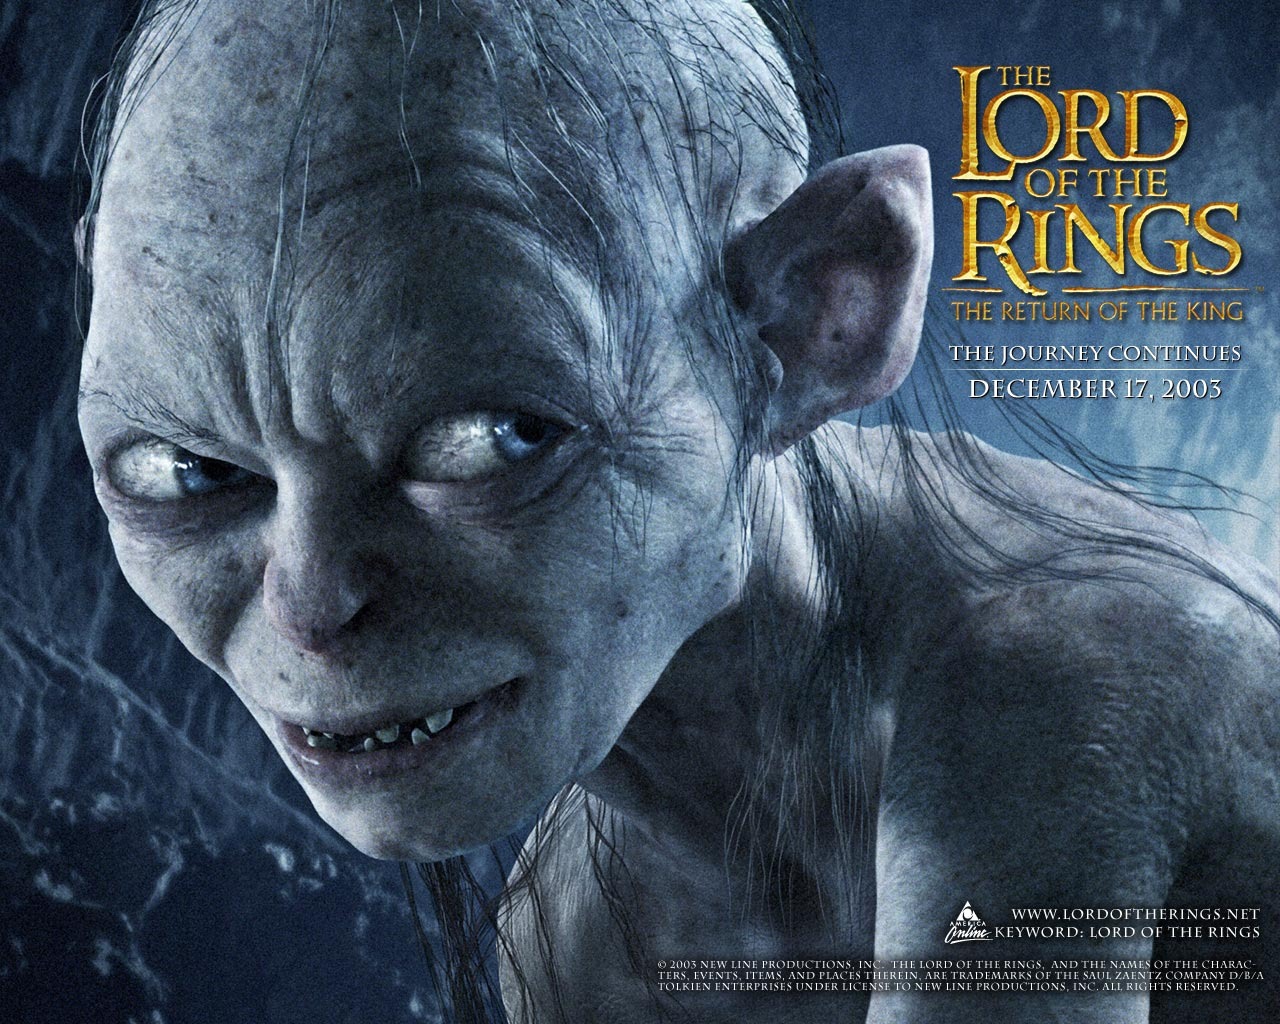 The Lord of the Rings wallpaper #15 - 1280x1024